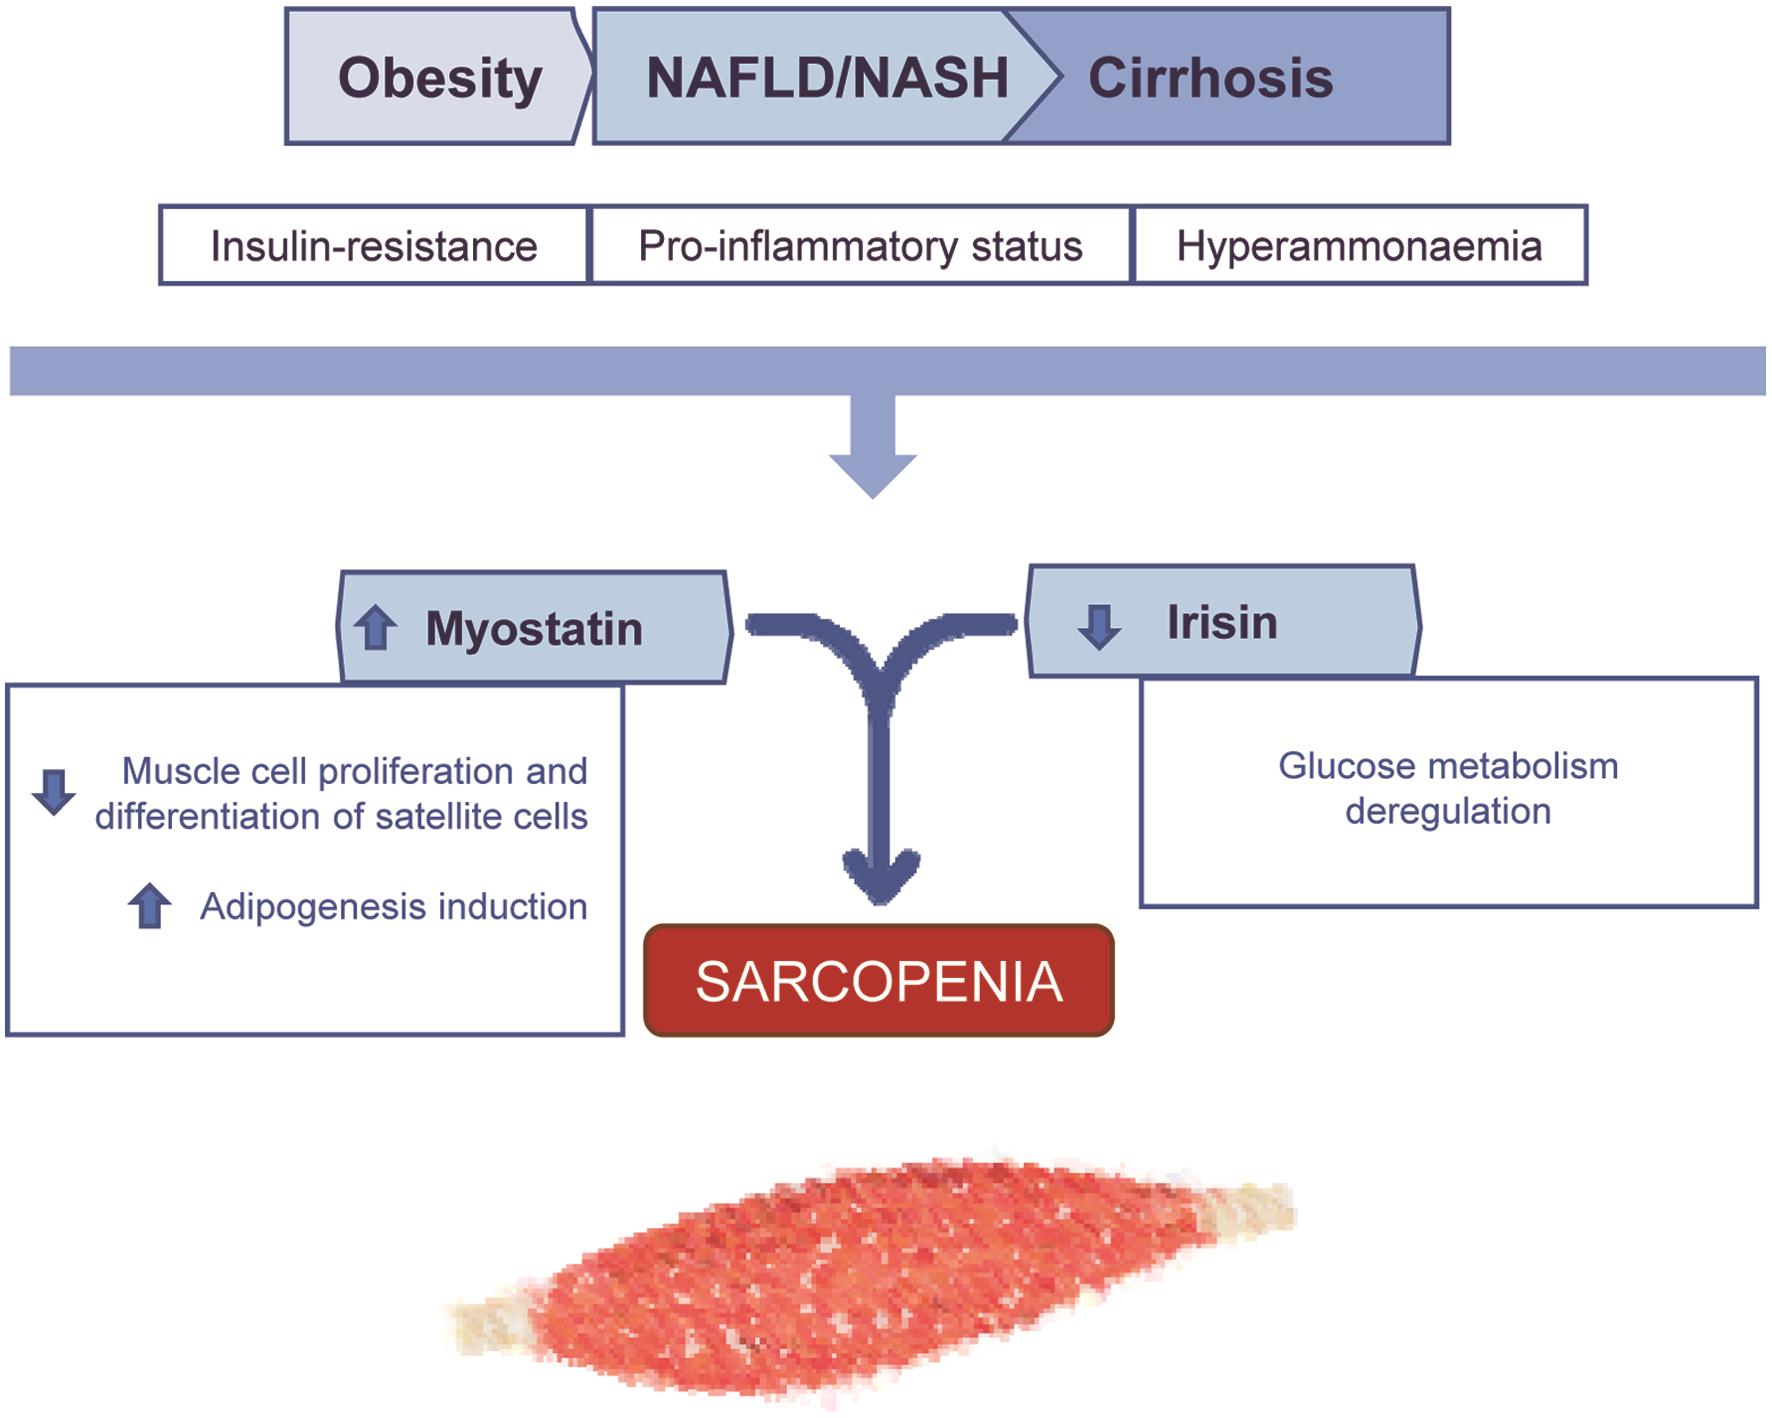 Myokines and sarcopenia in CLD: A summary of the principal derangements in myokine axis observed in patients with NAFLD.